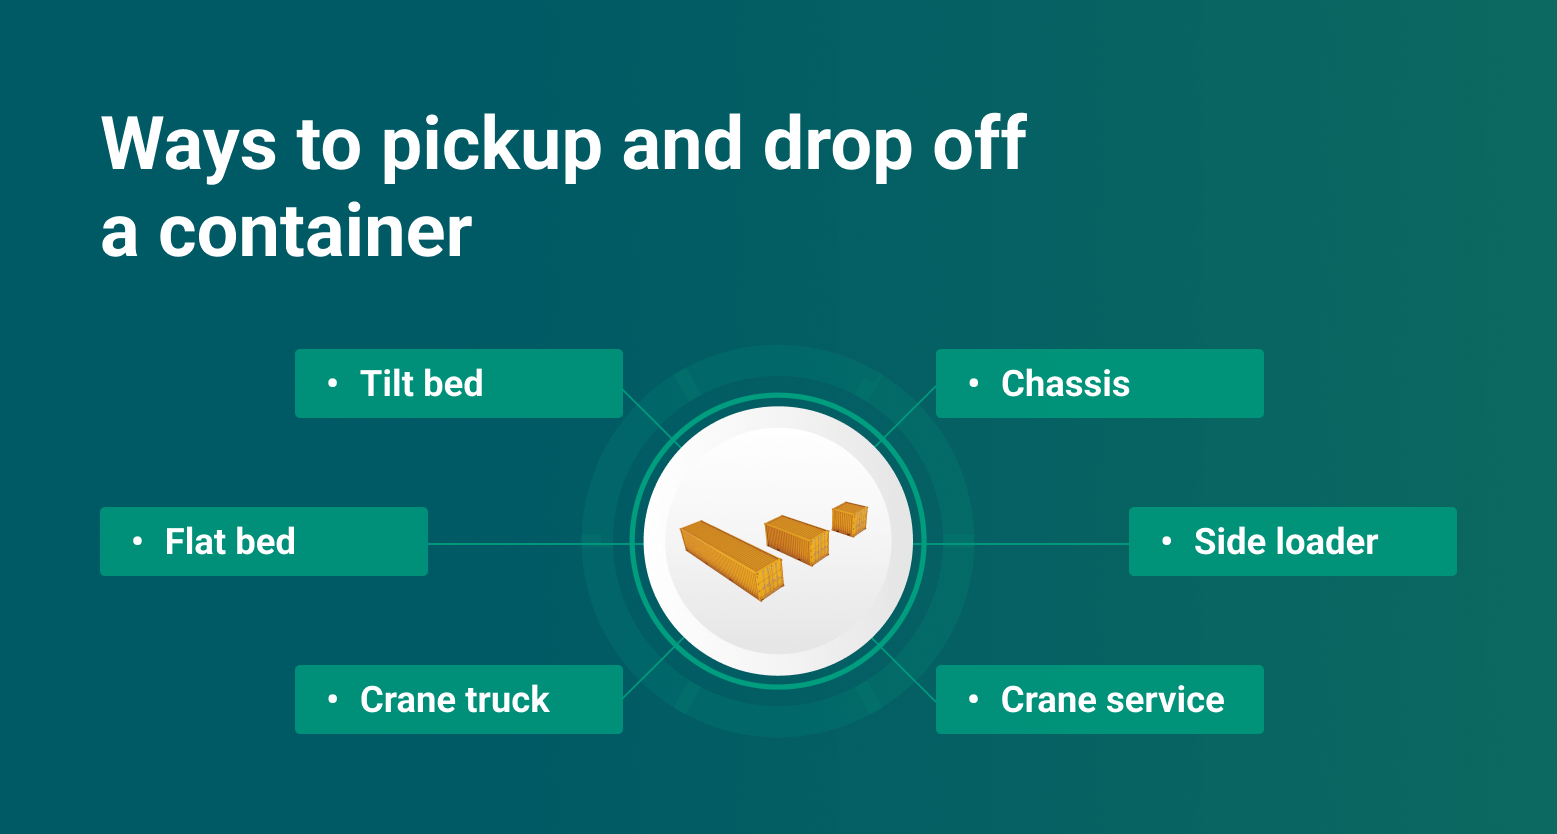 ways for container pickup and drop off